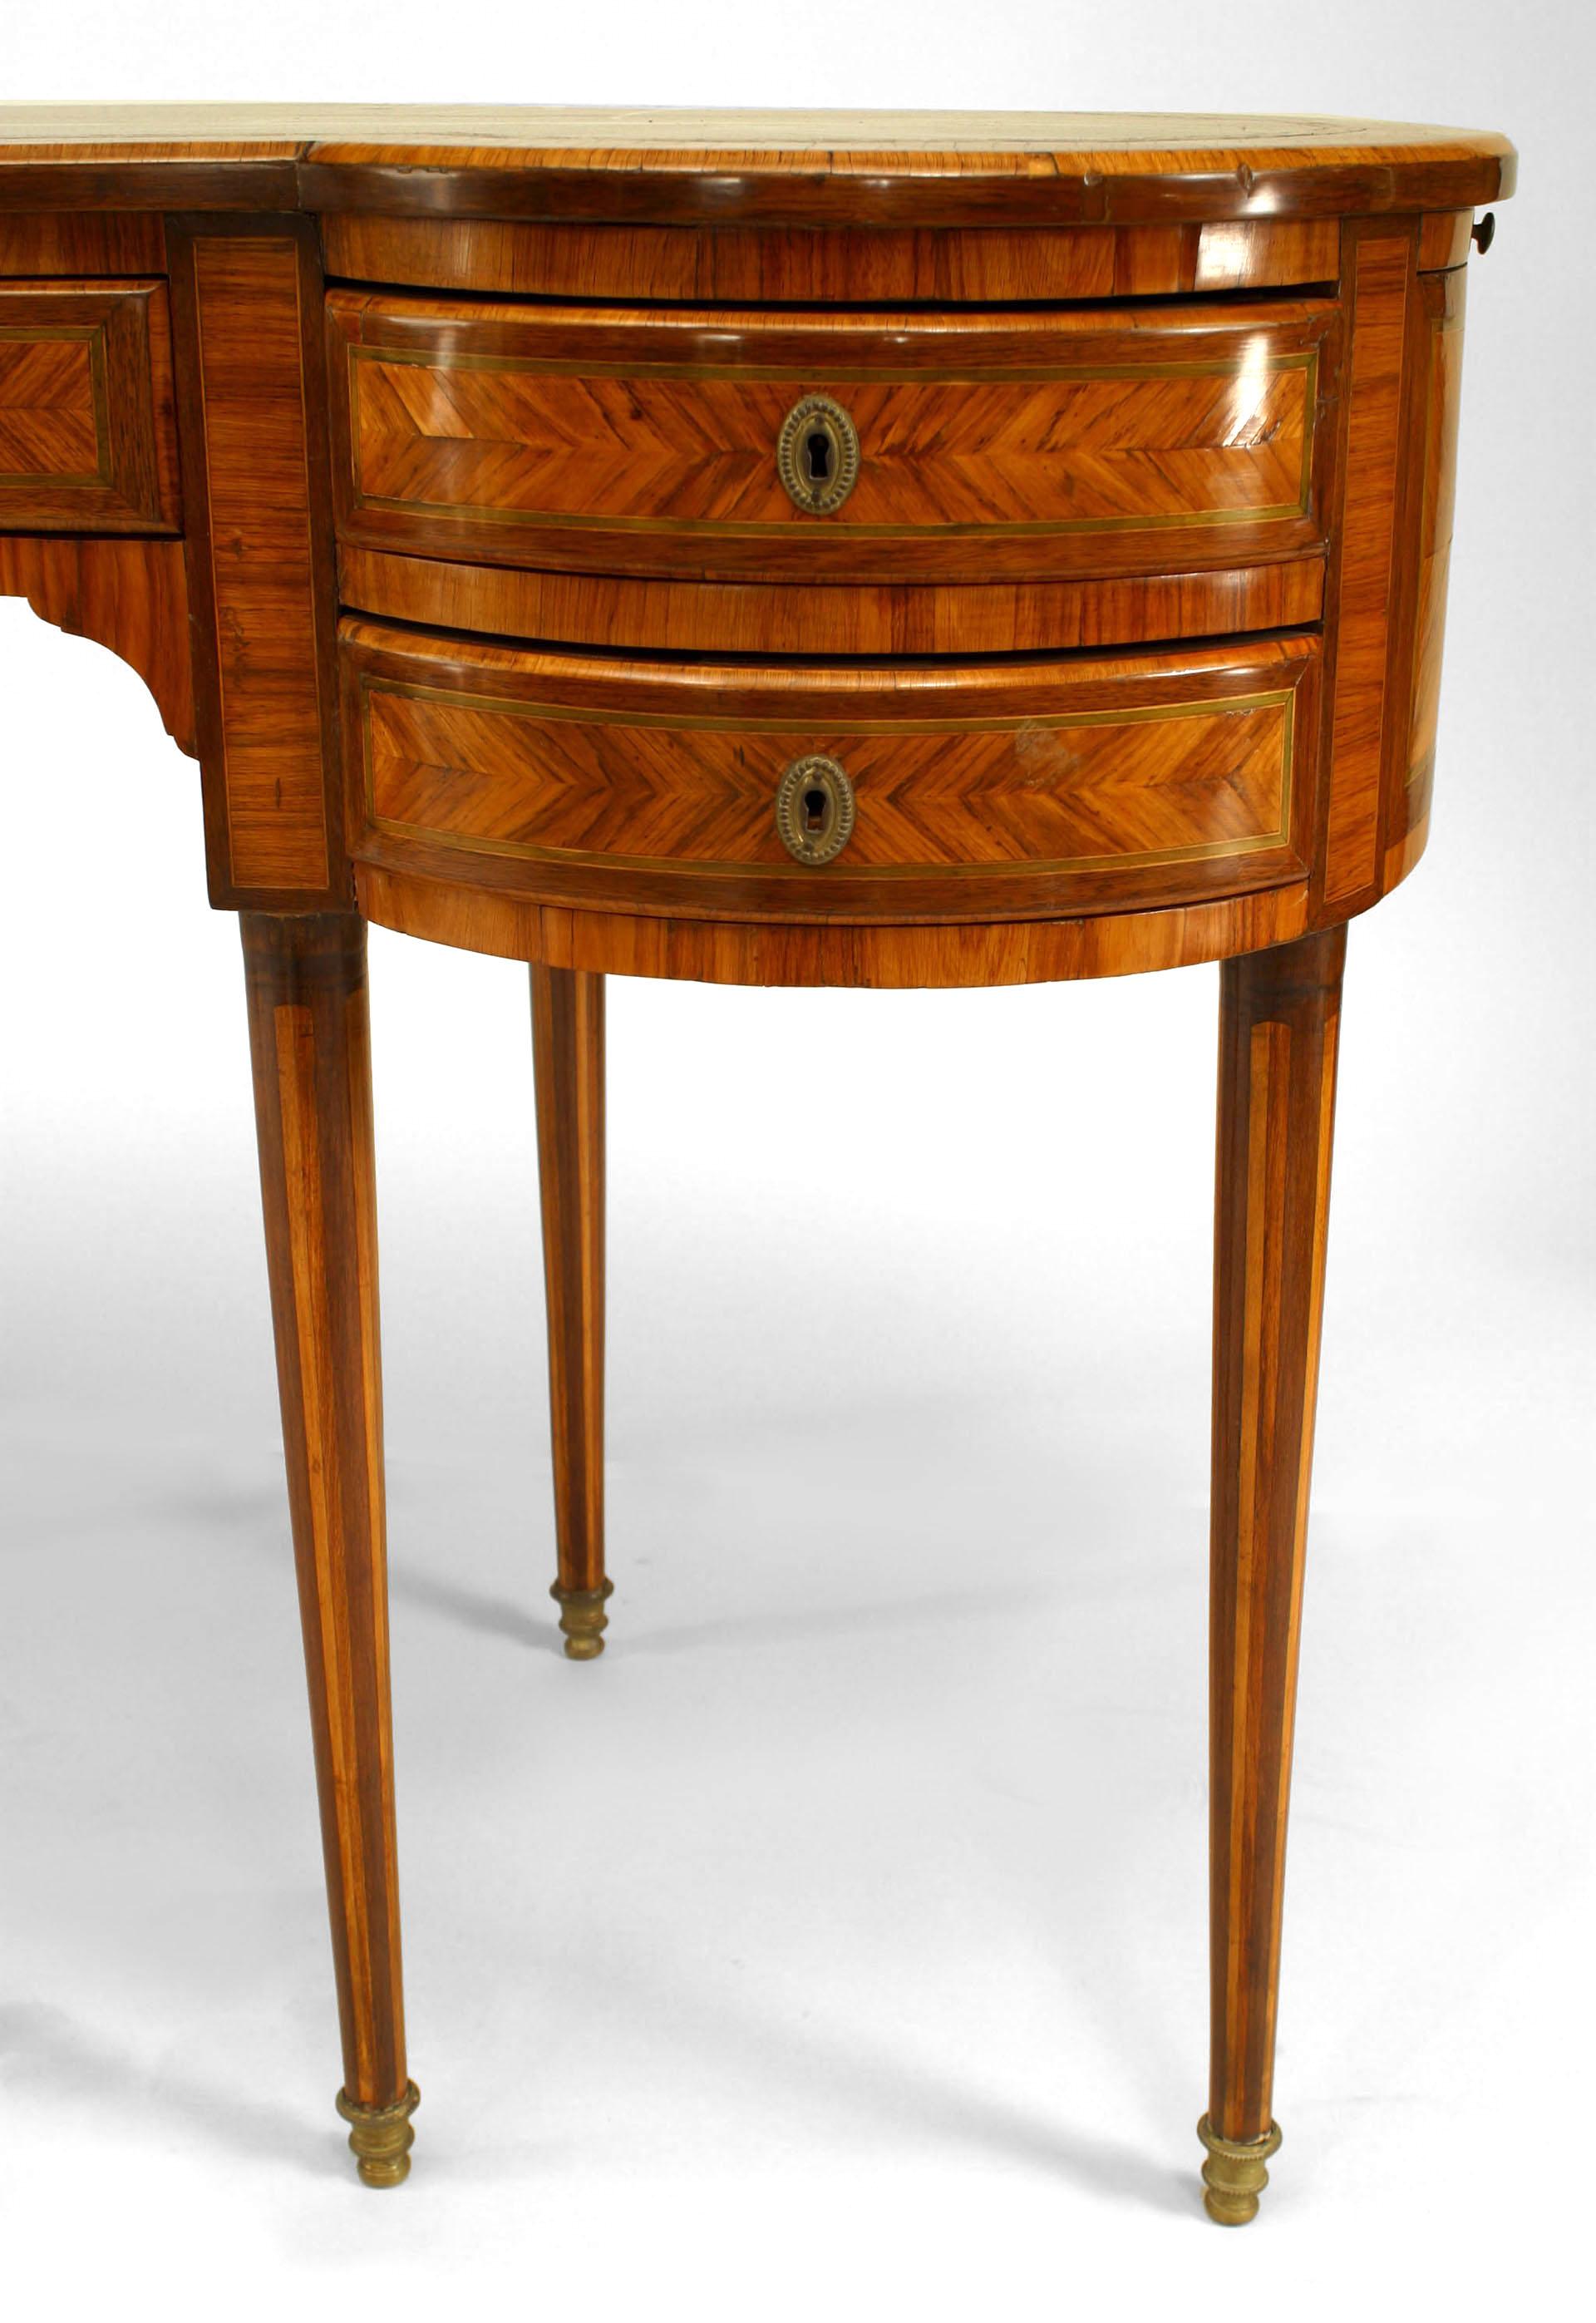 French Louis XVI Style Satinwood and Inlaid Kidney Desk For Sale 5